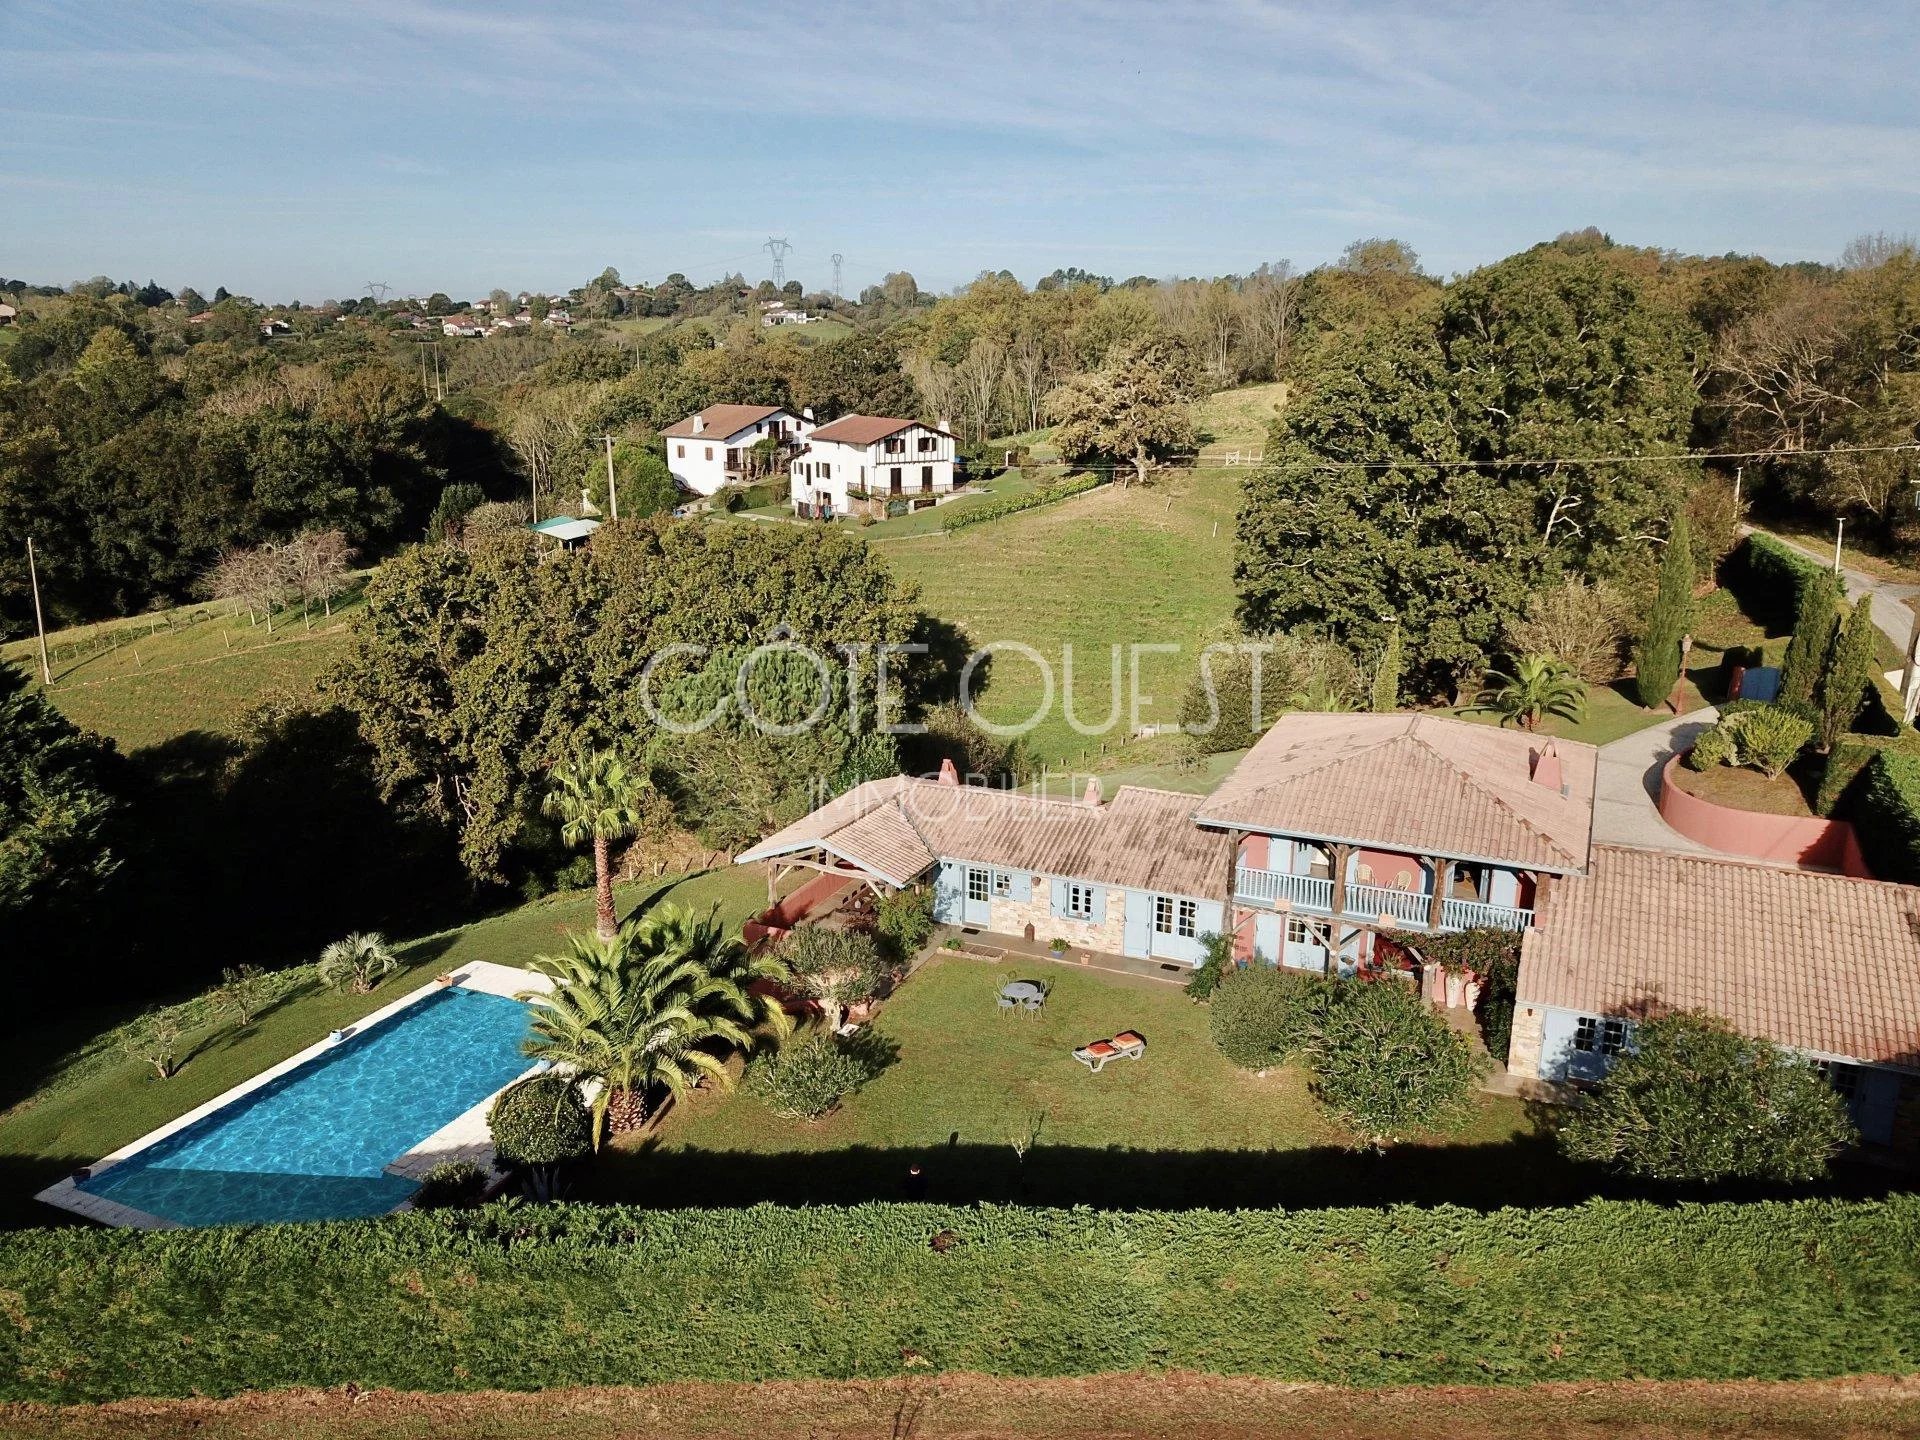 URRUGNE – A 4-BED VILLA WITH A SWIMMING POOL